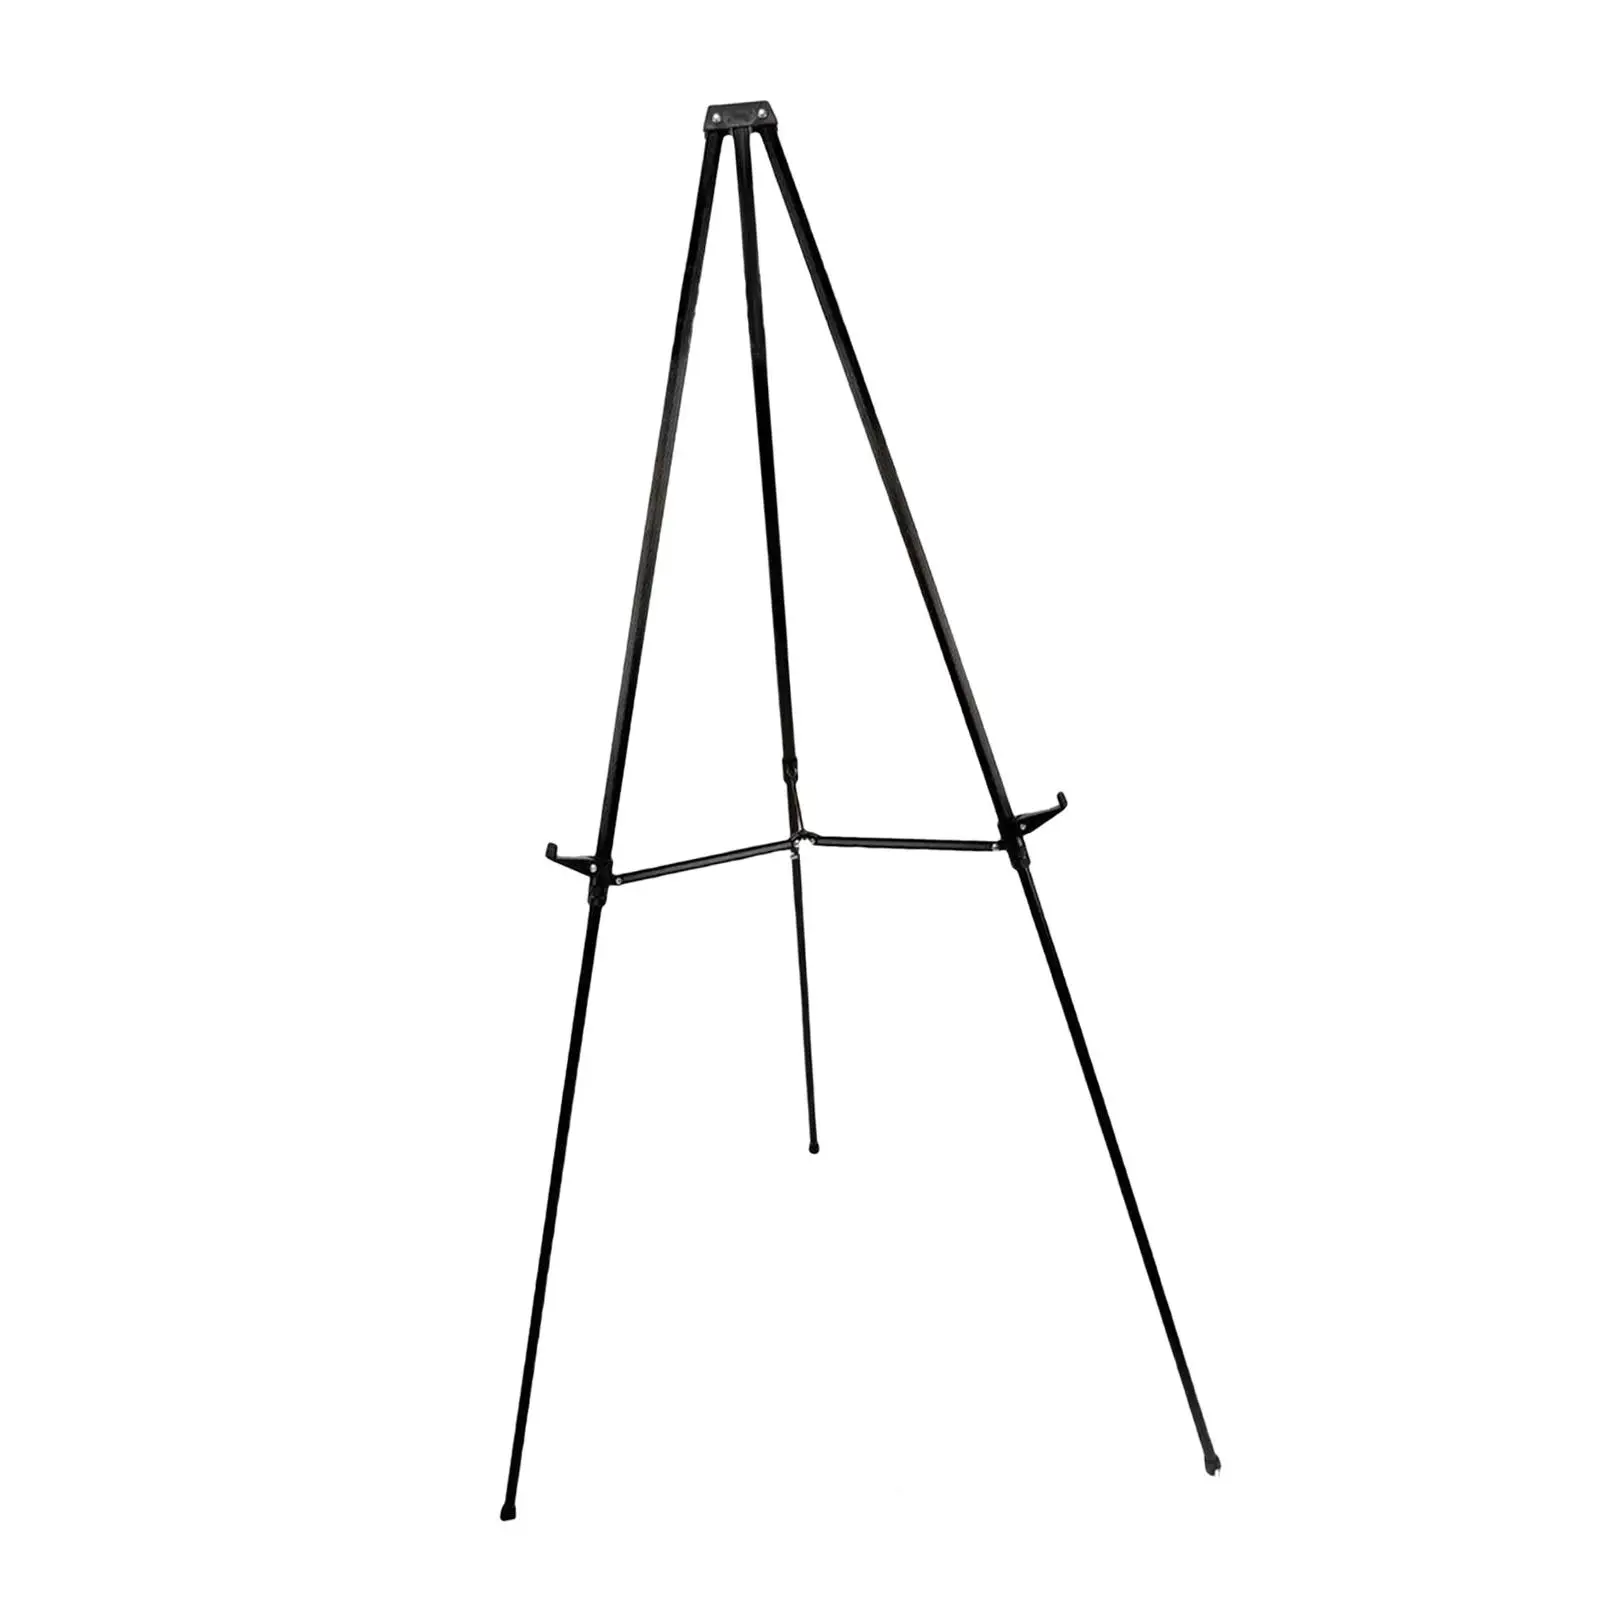 Artist Easel Metal Painting Easel Tripod Folding Tripod Display Easel Stand Holder for Floor Photo Cemetery Party Sign Wedding